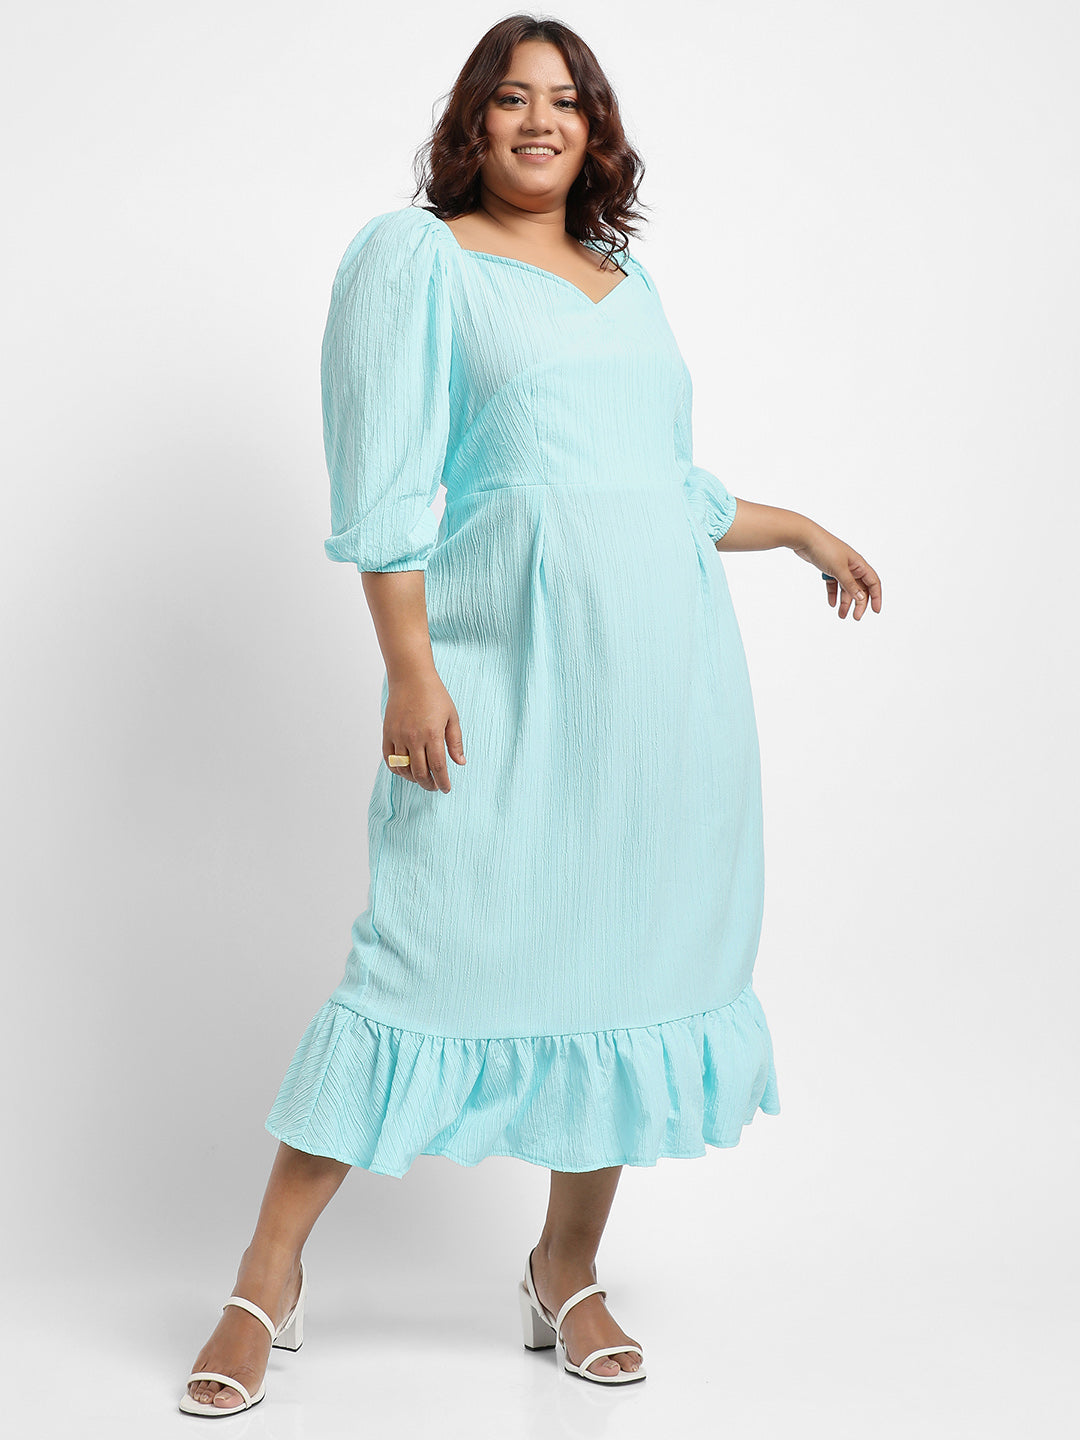 Buy Plus Size Clothing 4x Online In India -  India